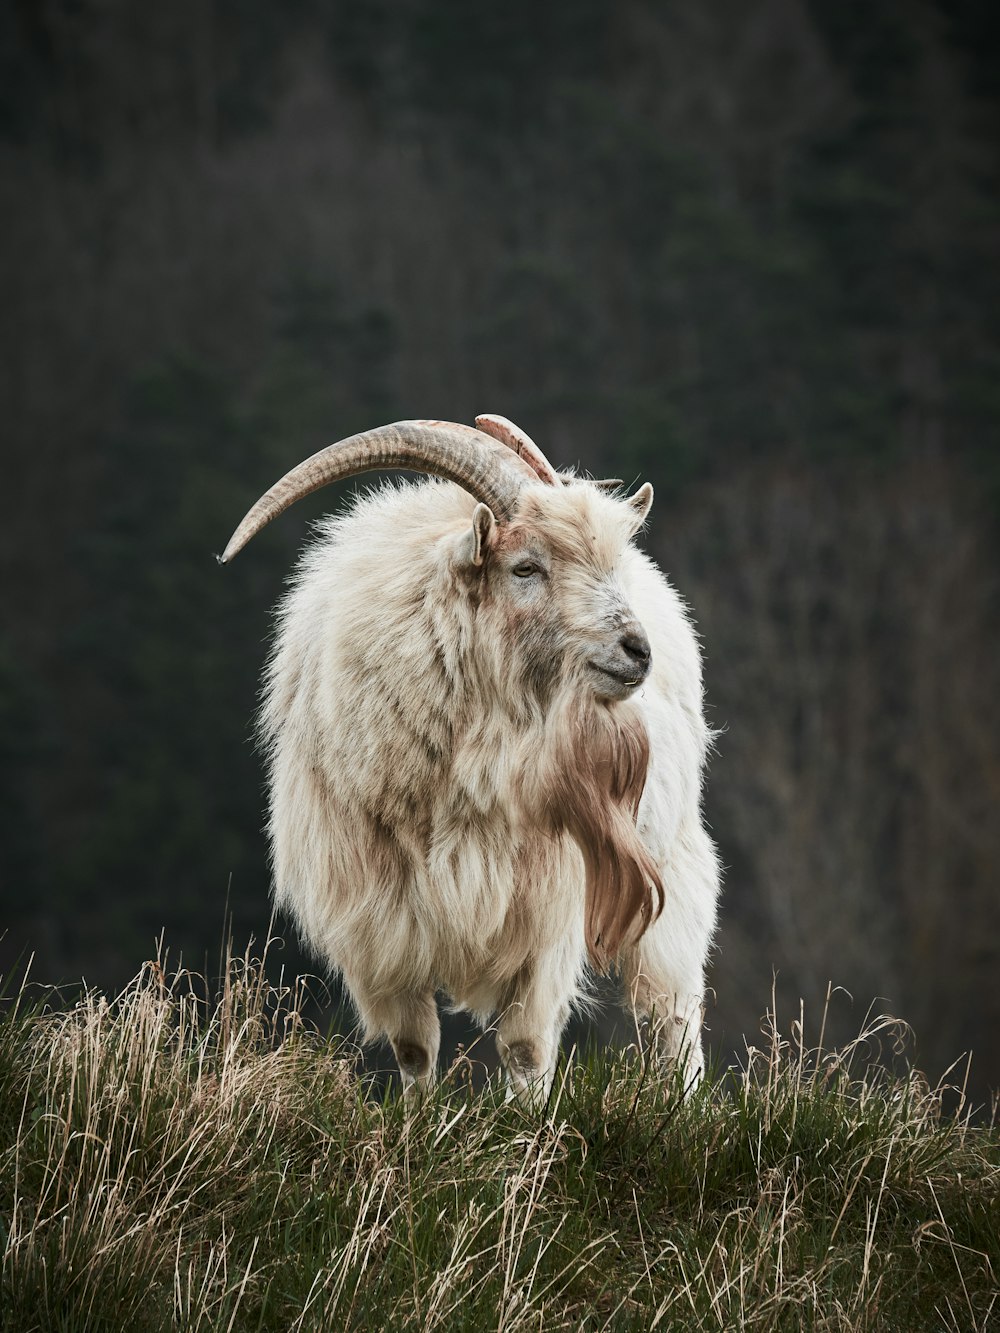 a mountain goat with long horns standing on a grassy hill